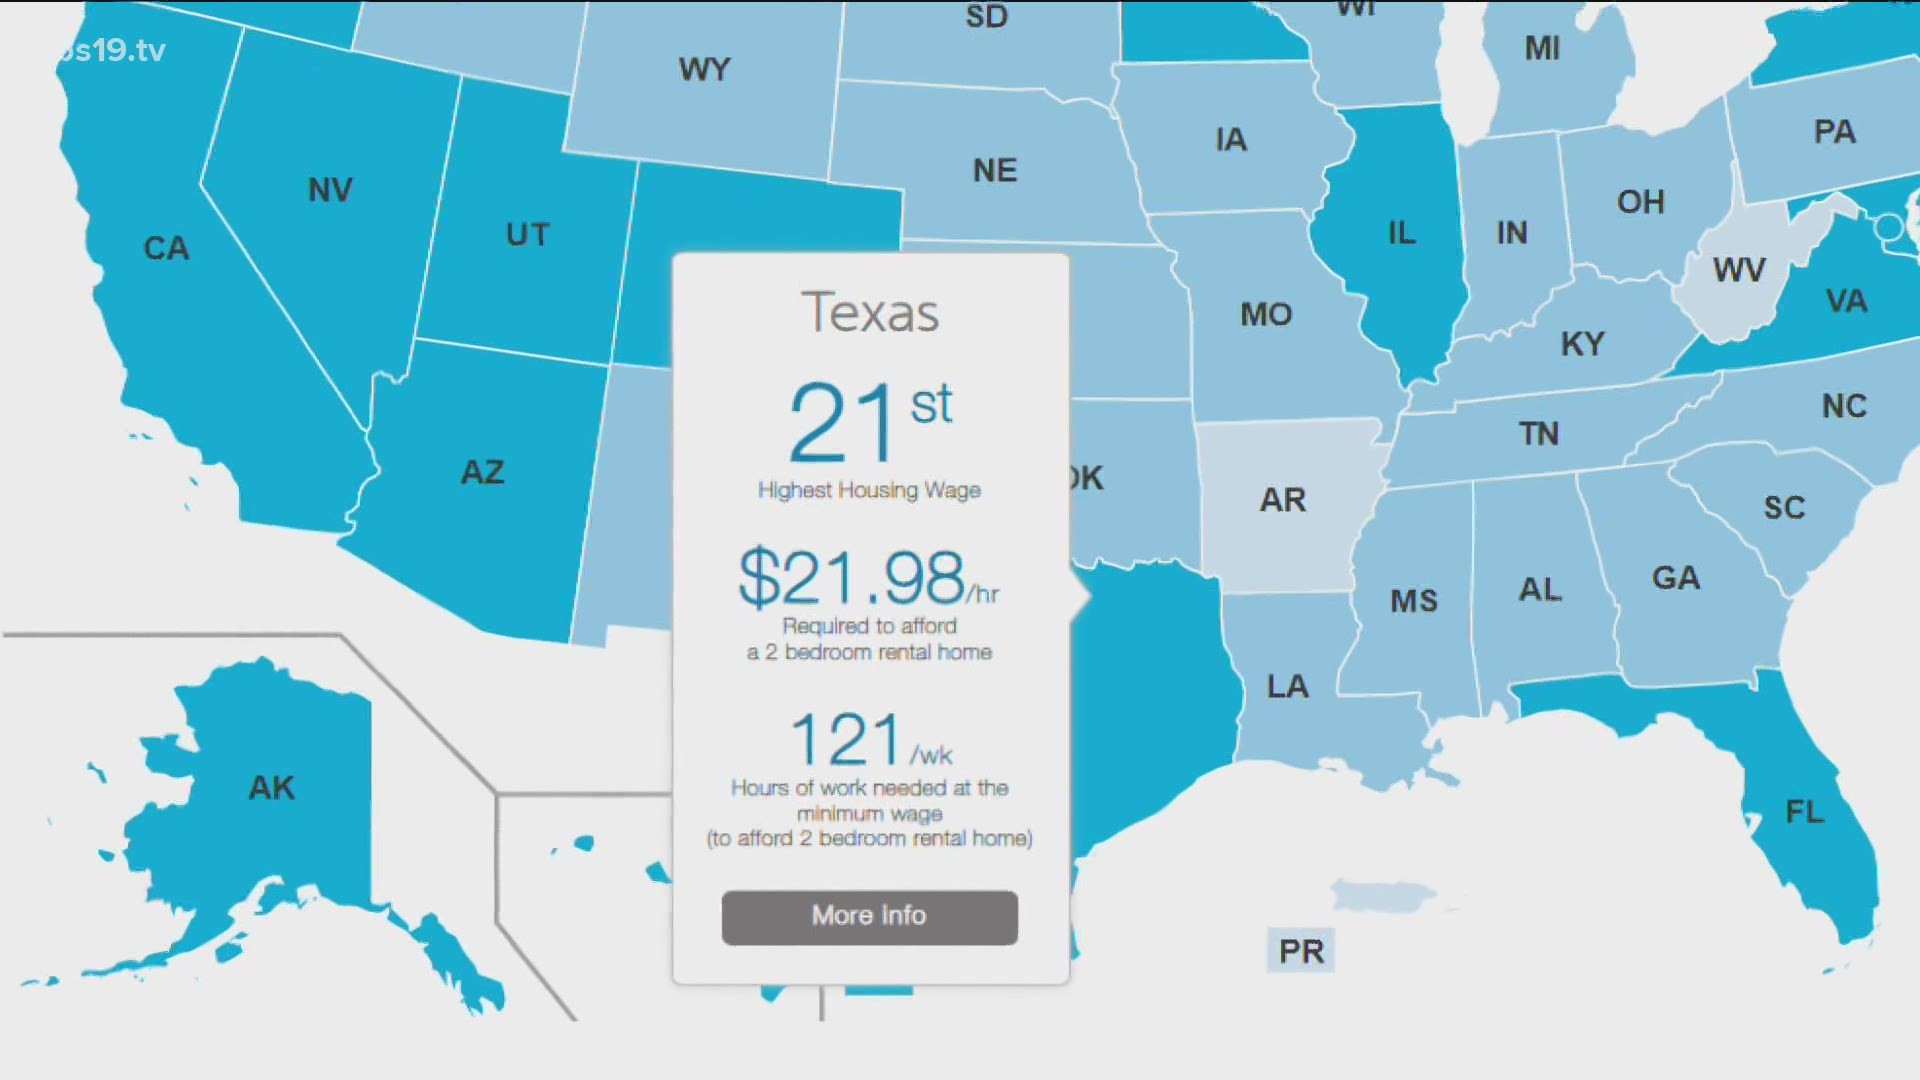 Texas ranked 21st highest housing wage nationwide cbs19.tv